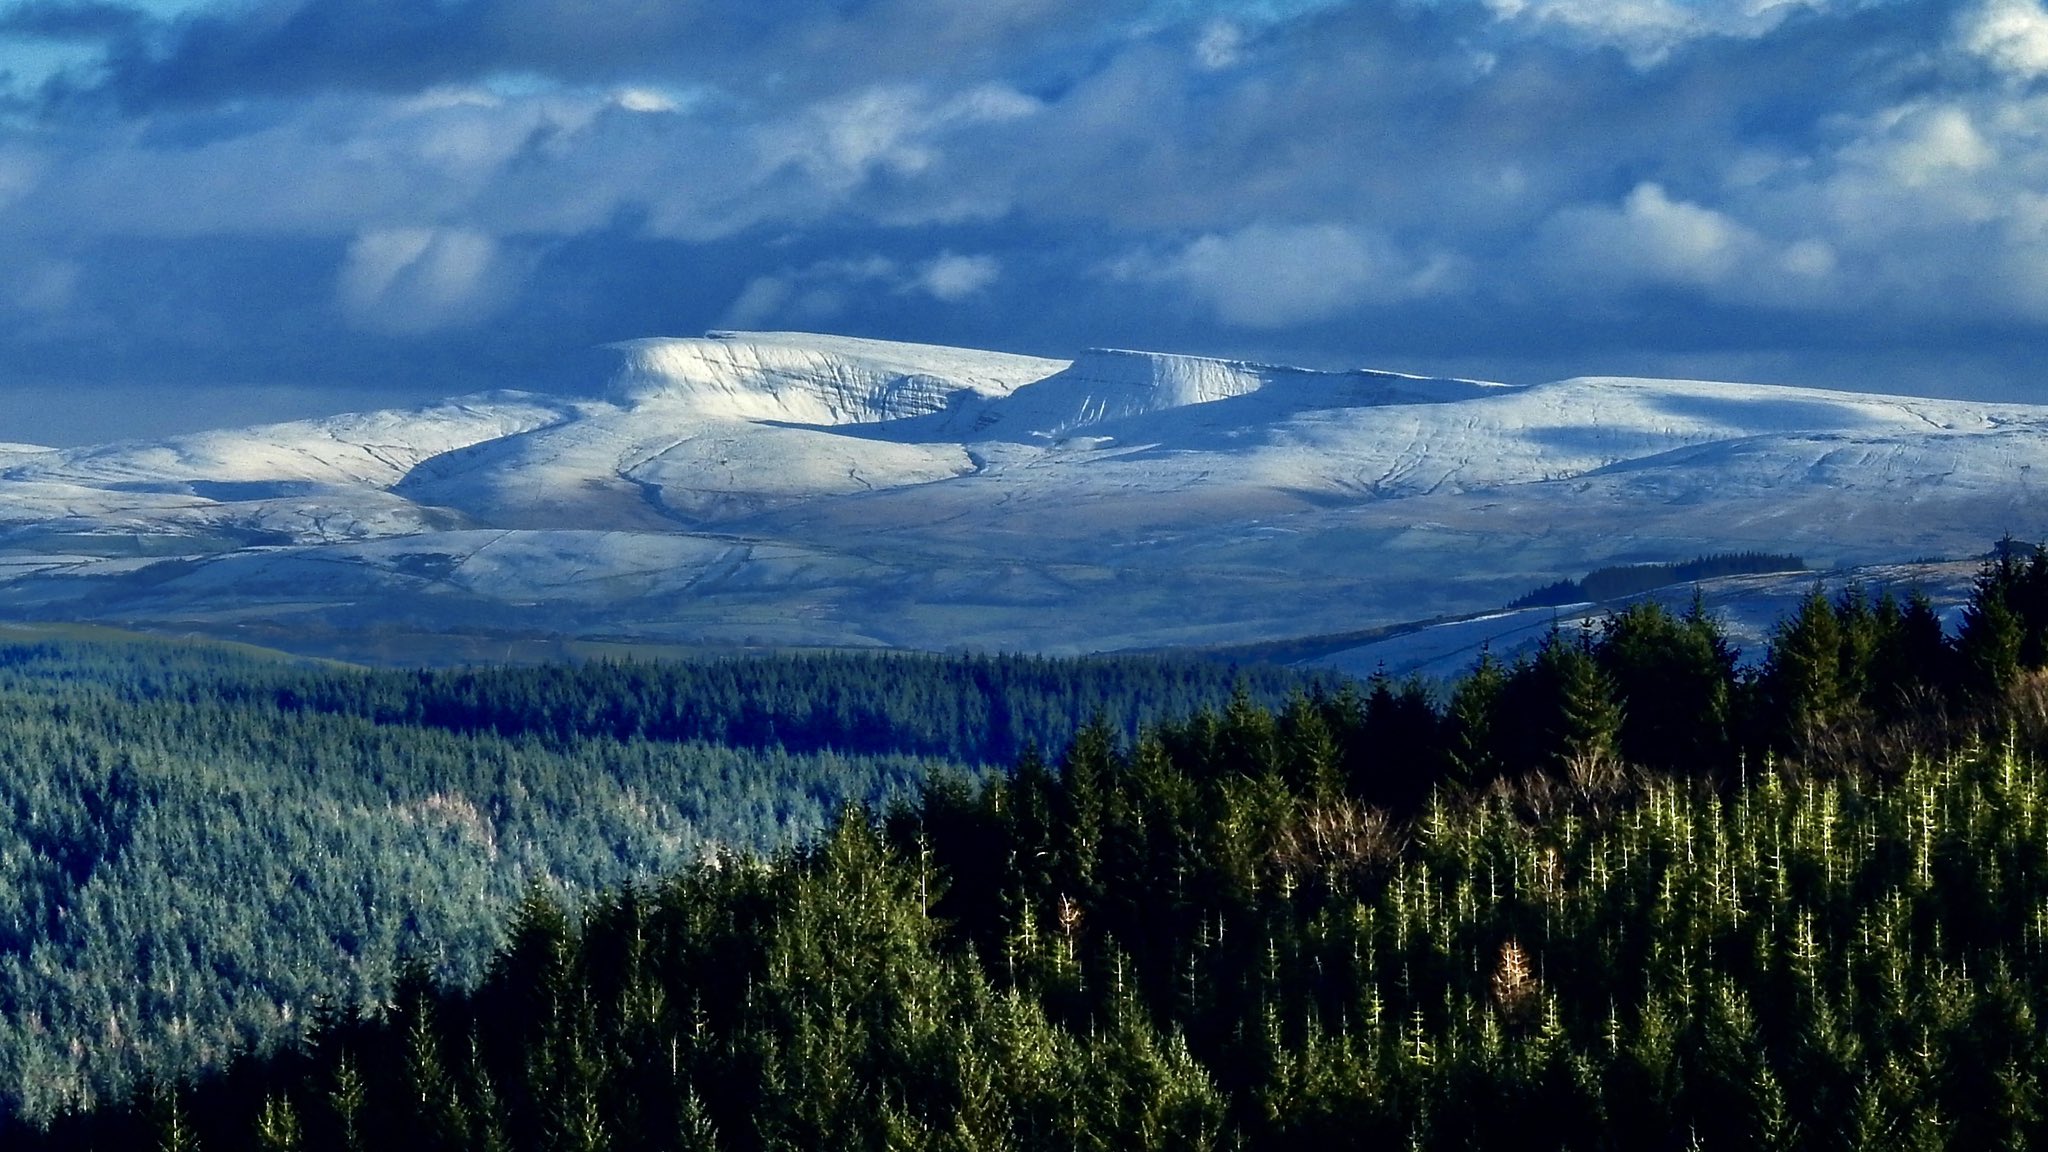 1st Place Snow capped Black mountains by Aled Hall @AledHall